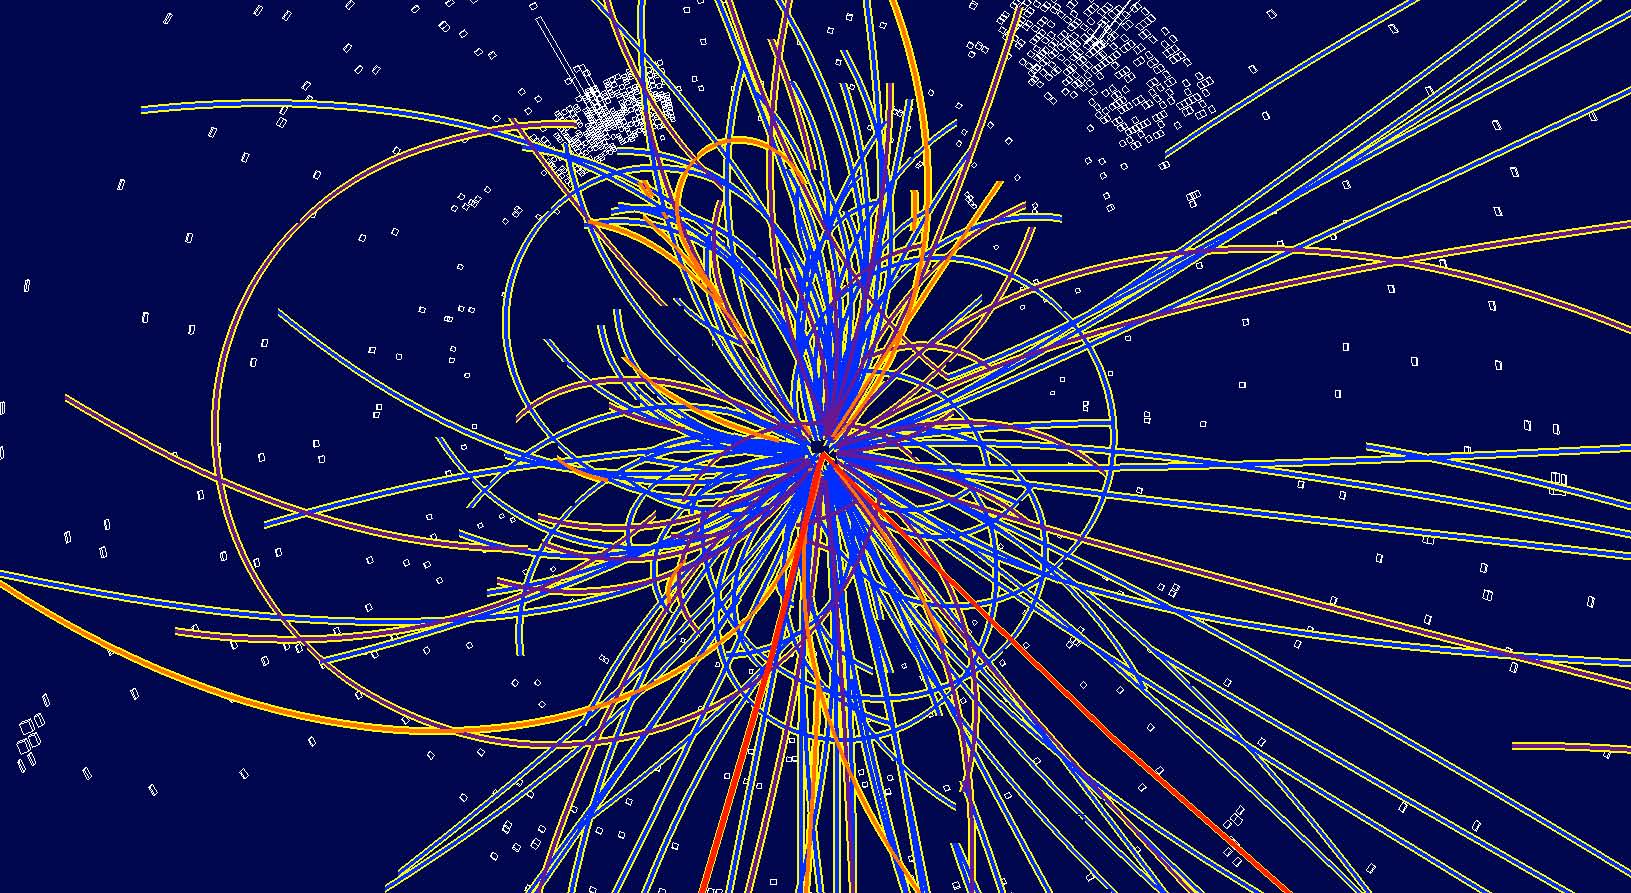 Tracks of many particles emerging from the collision of two protons like an asterisk